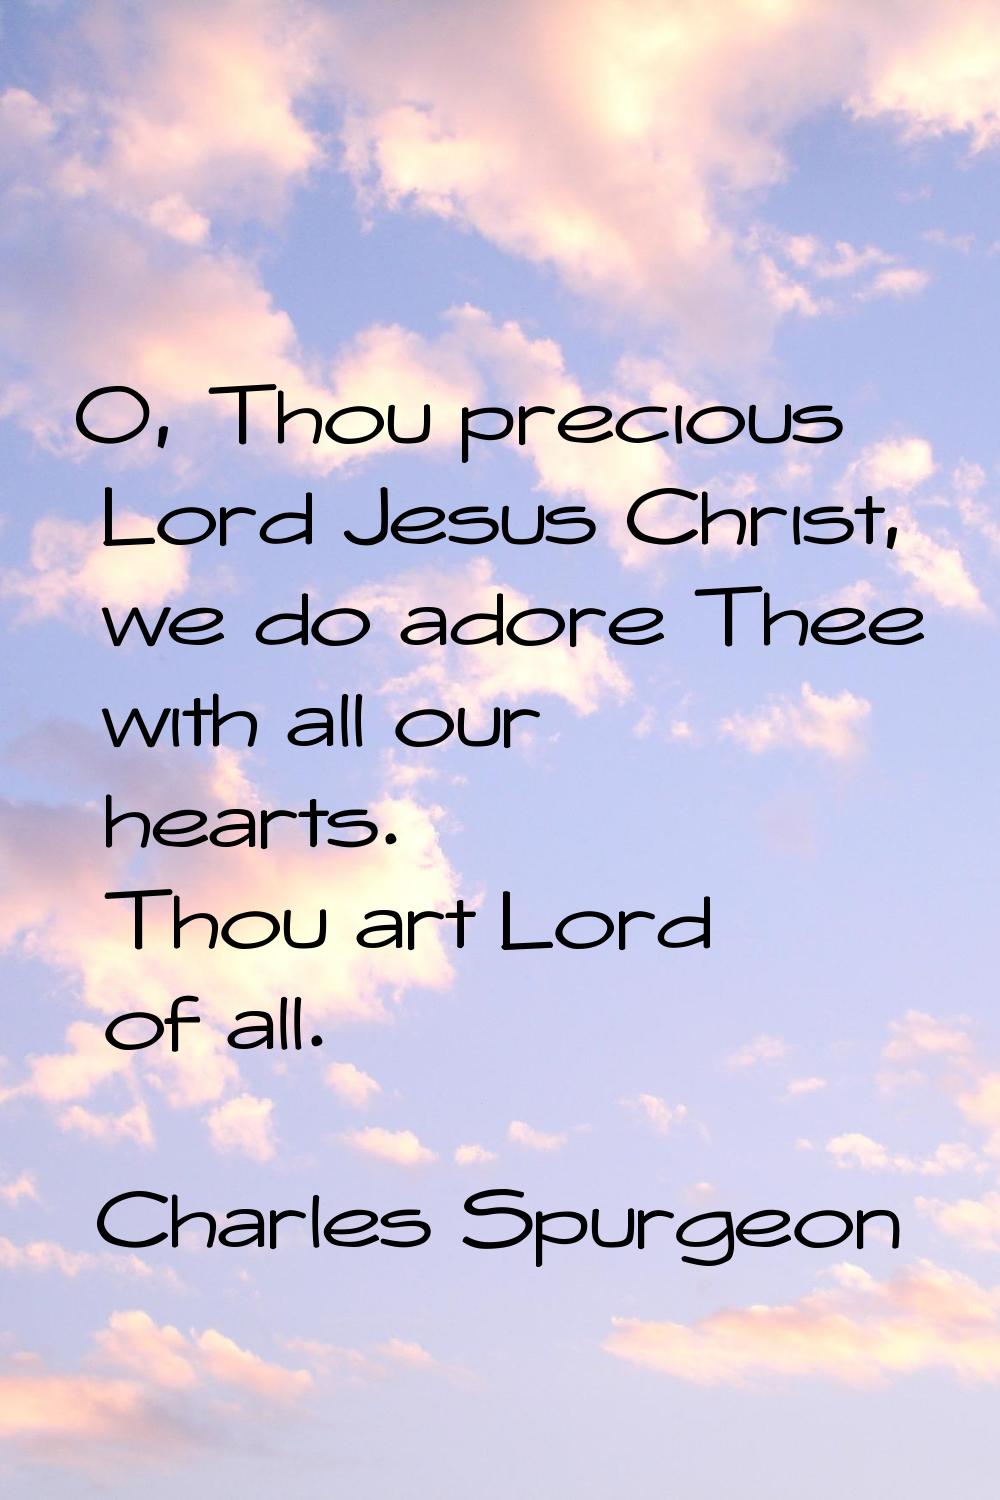 O, Thou precious Lord Jesus Christ, we do adore Thee with all our hearts. Thou art Lord of all.